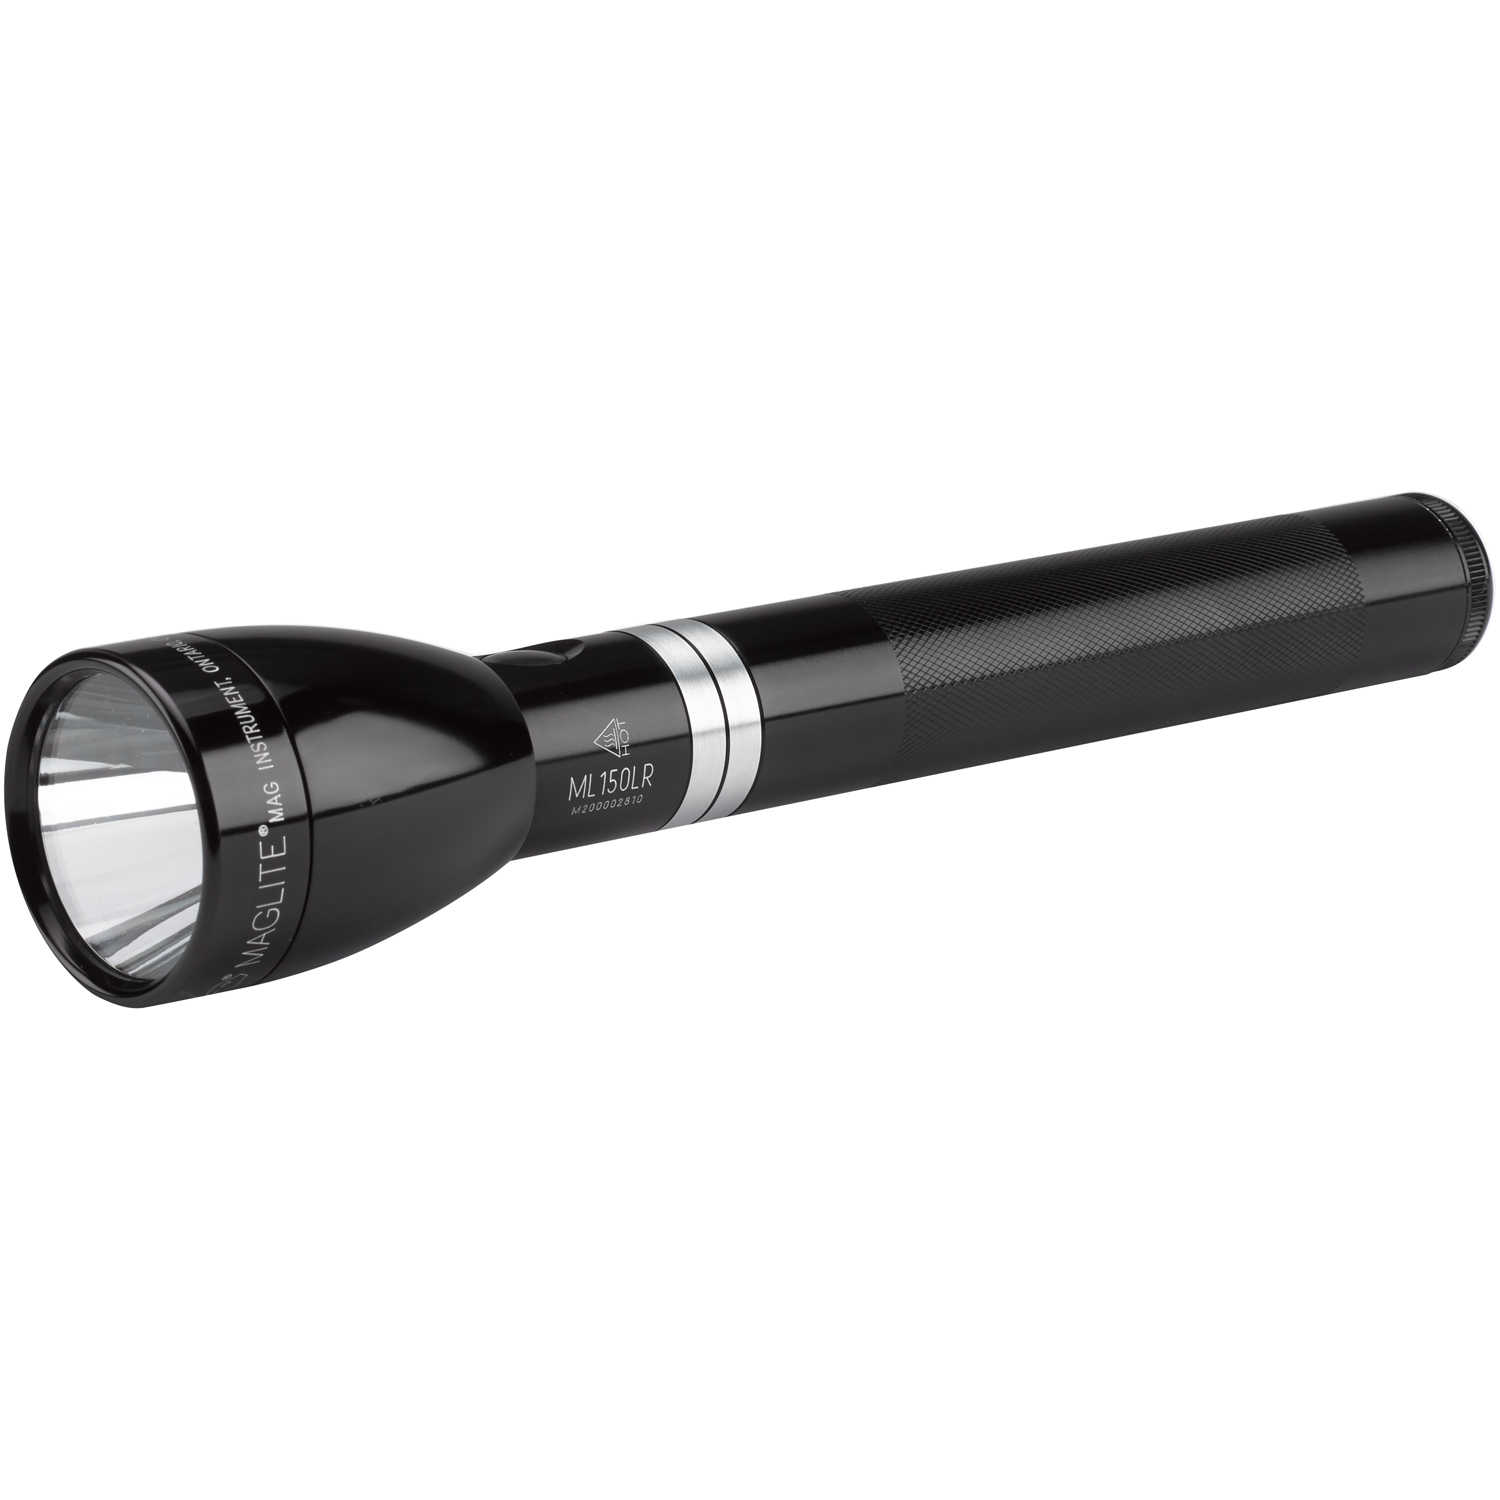 MAG CHARGER LED Genuine Maglite Rechargeable Flashlight Torch System 